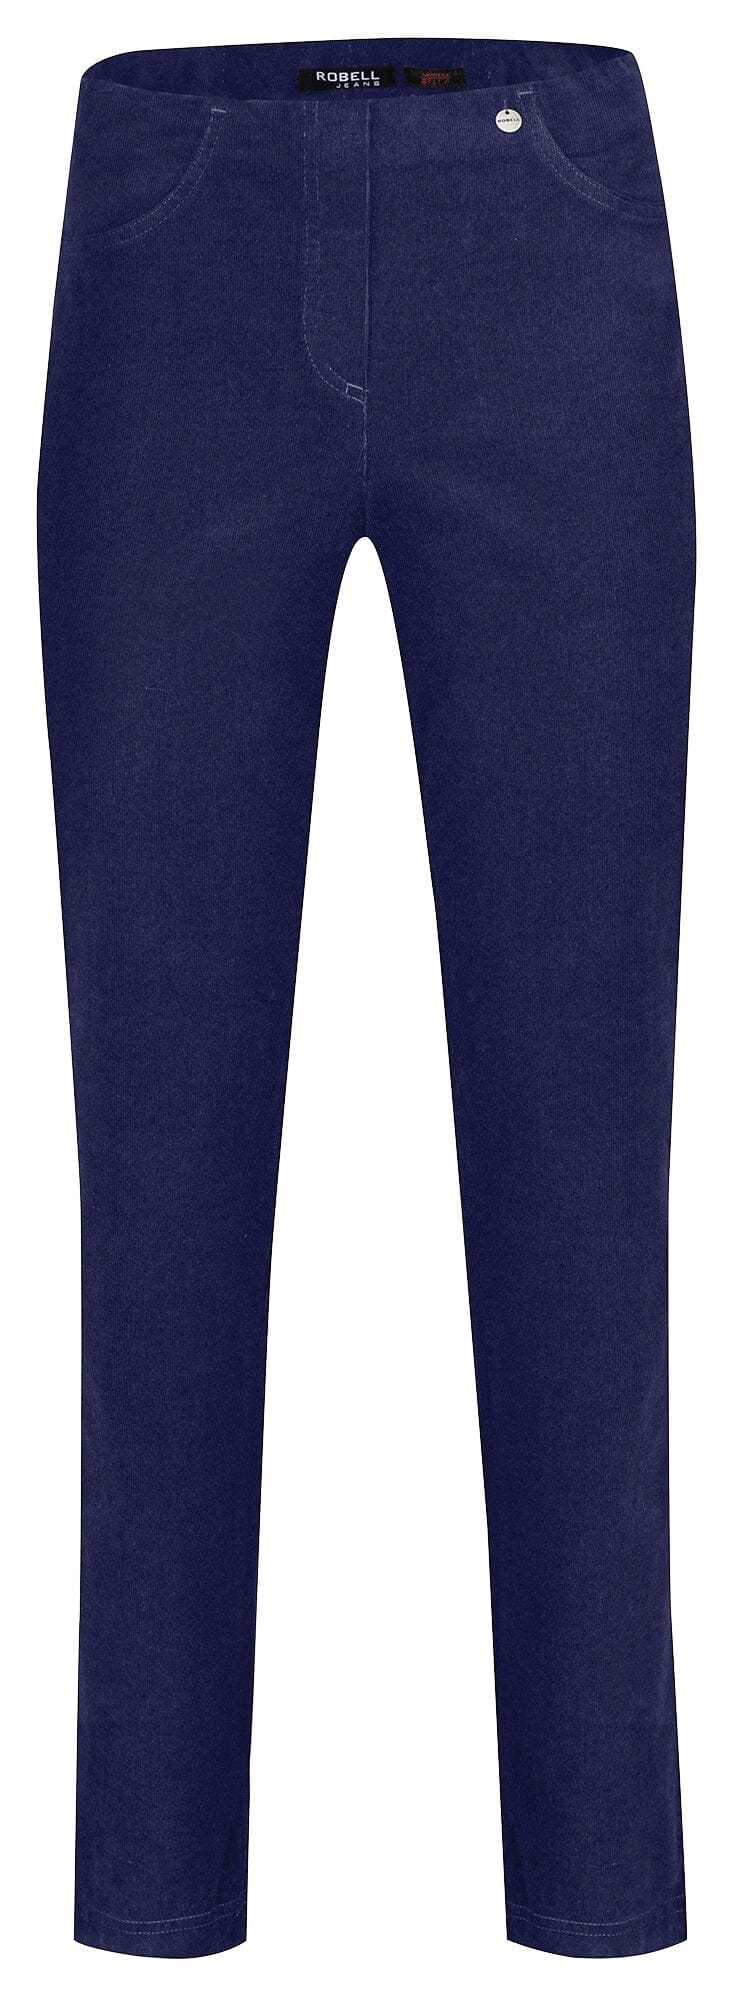 Bella Slim Fit Stretch Corduroys in Liberty Blue Pants Robell 